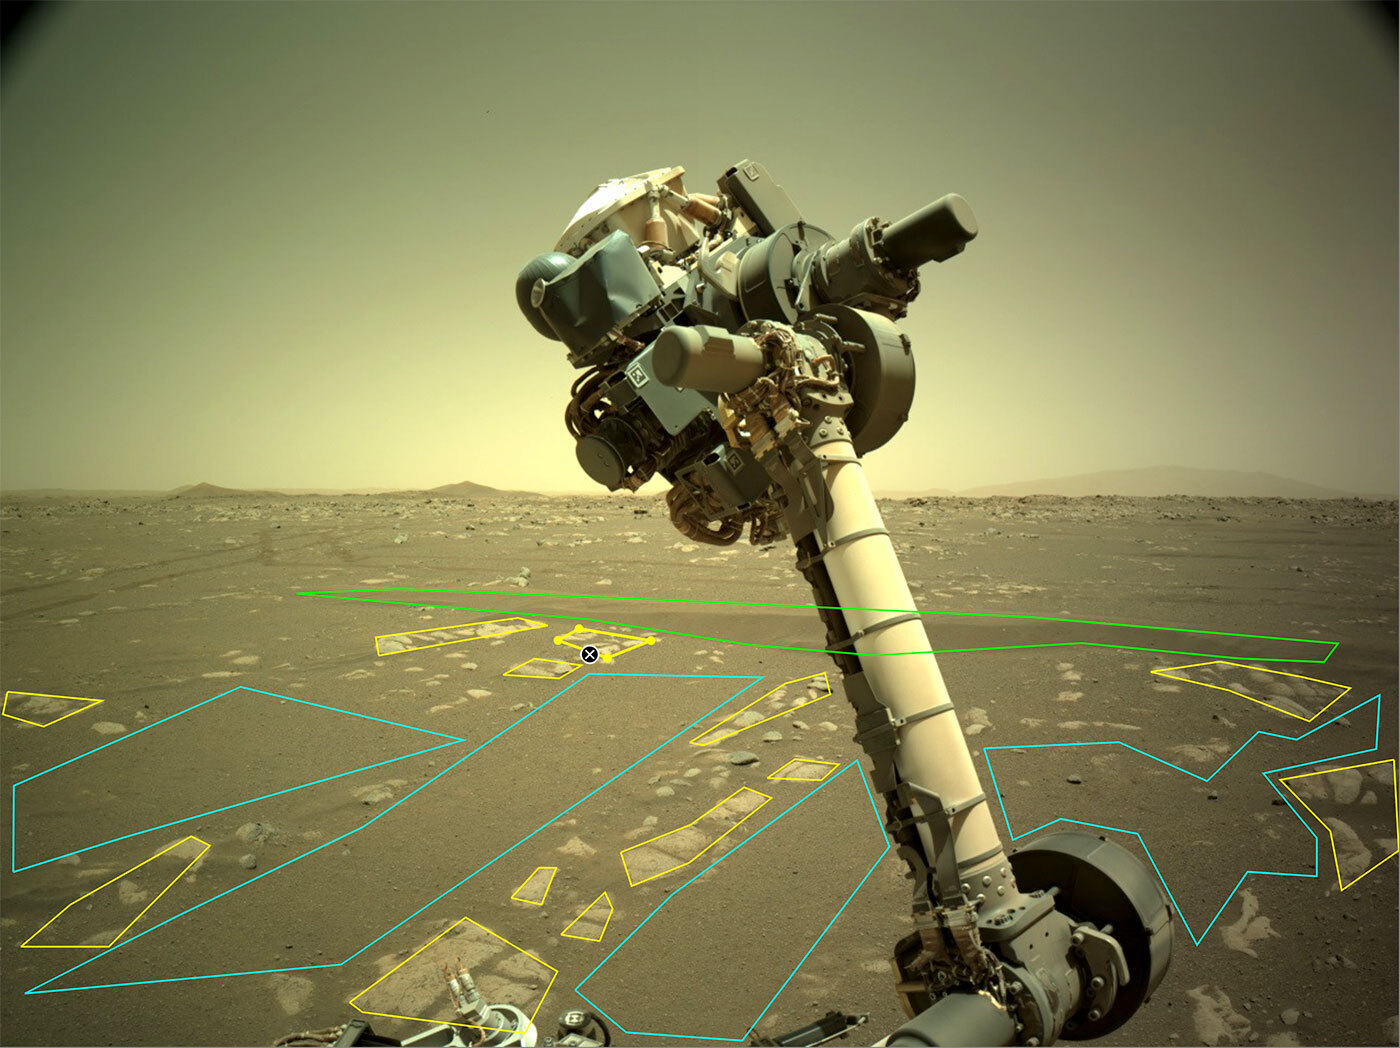 This is an image of the robotic arm of NASA’s Perseverance rover. The image is annotated by outlining on particular rocks on the surface. Users outline and identify different rock and landscape features to help train an artificial intelligence algorithm that will help improve the capabilities of Mars rovers.